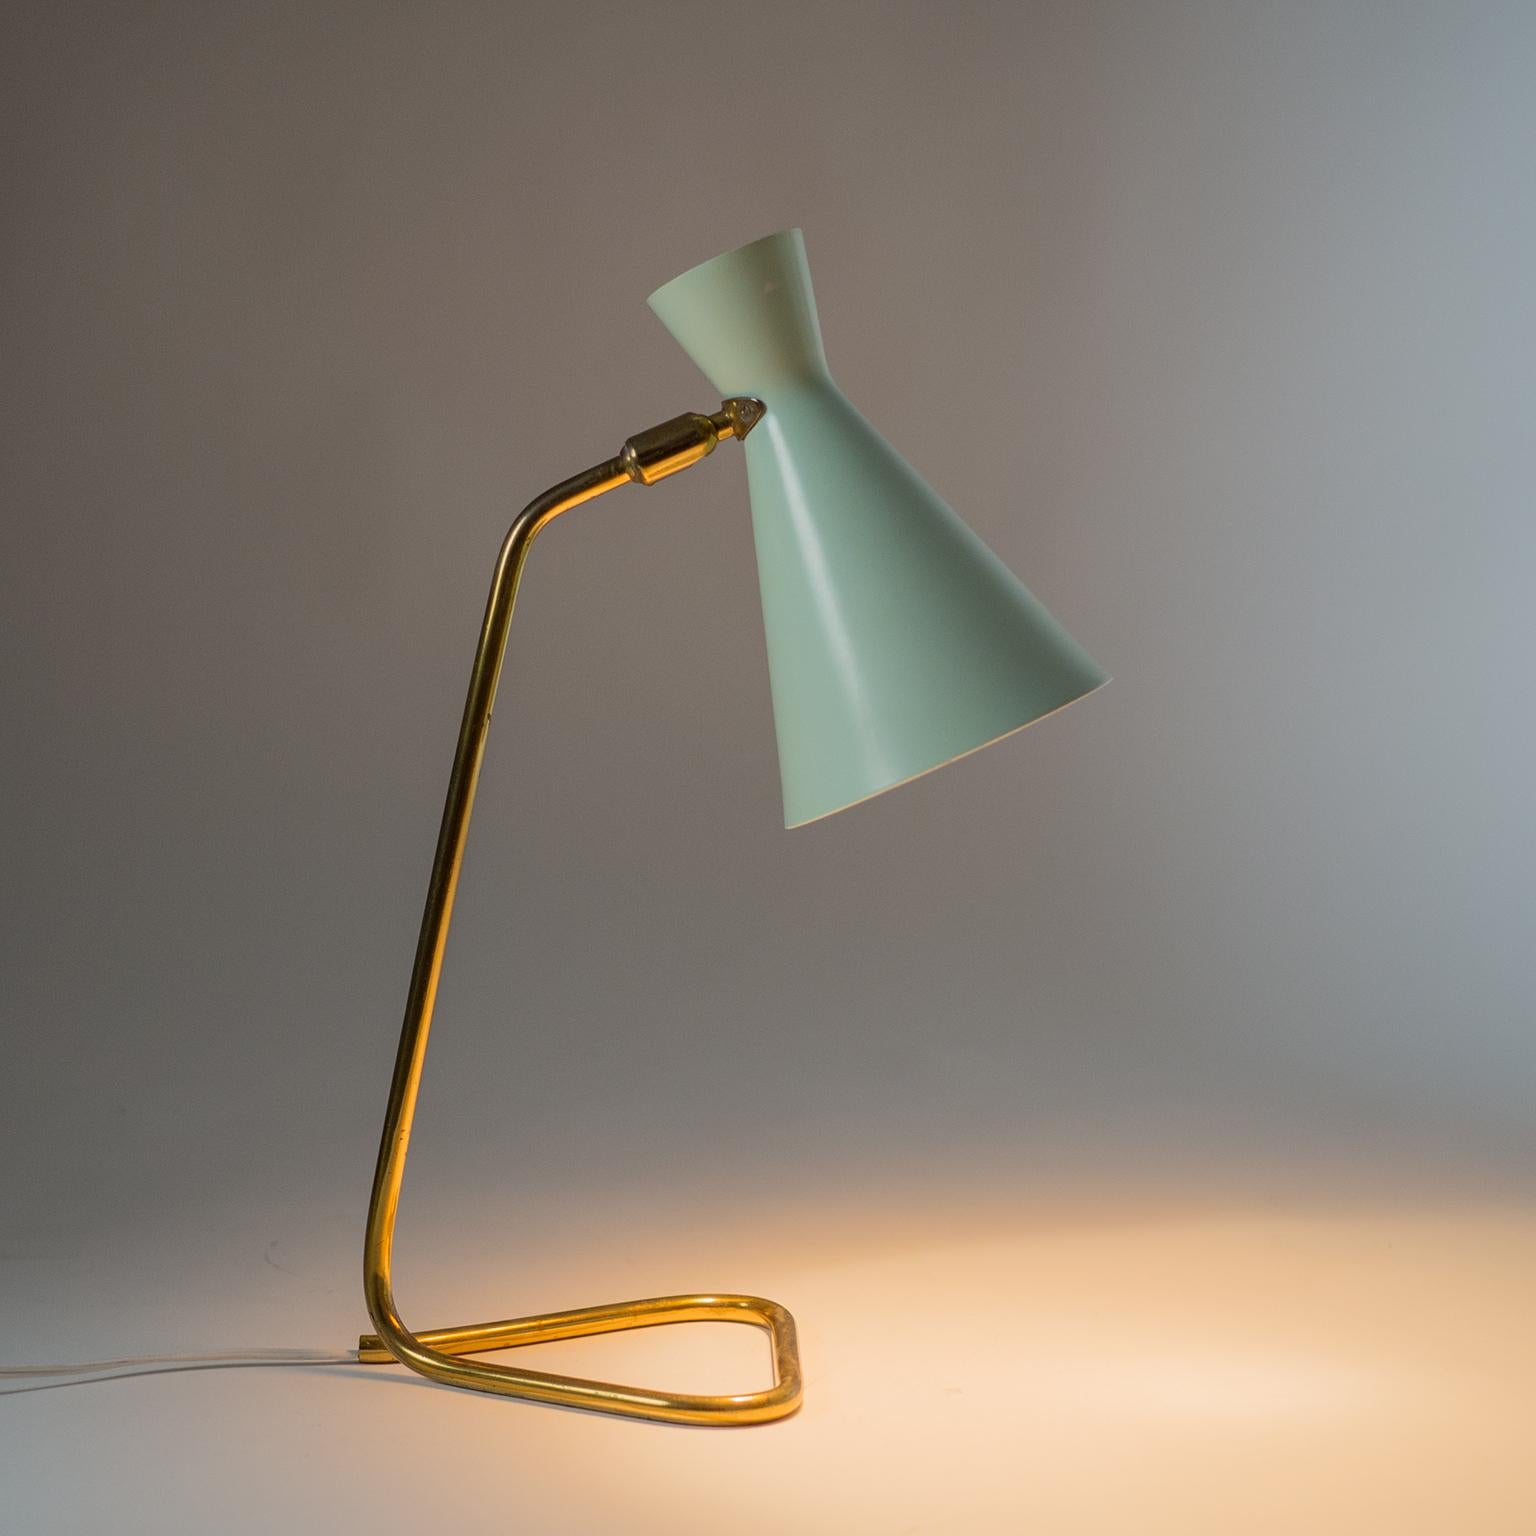 Swiss Pastel and Brass Table Lamp by BAG Turgi, 1950s